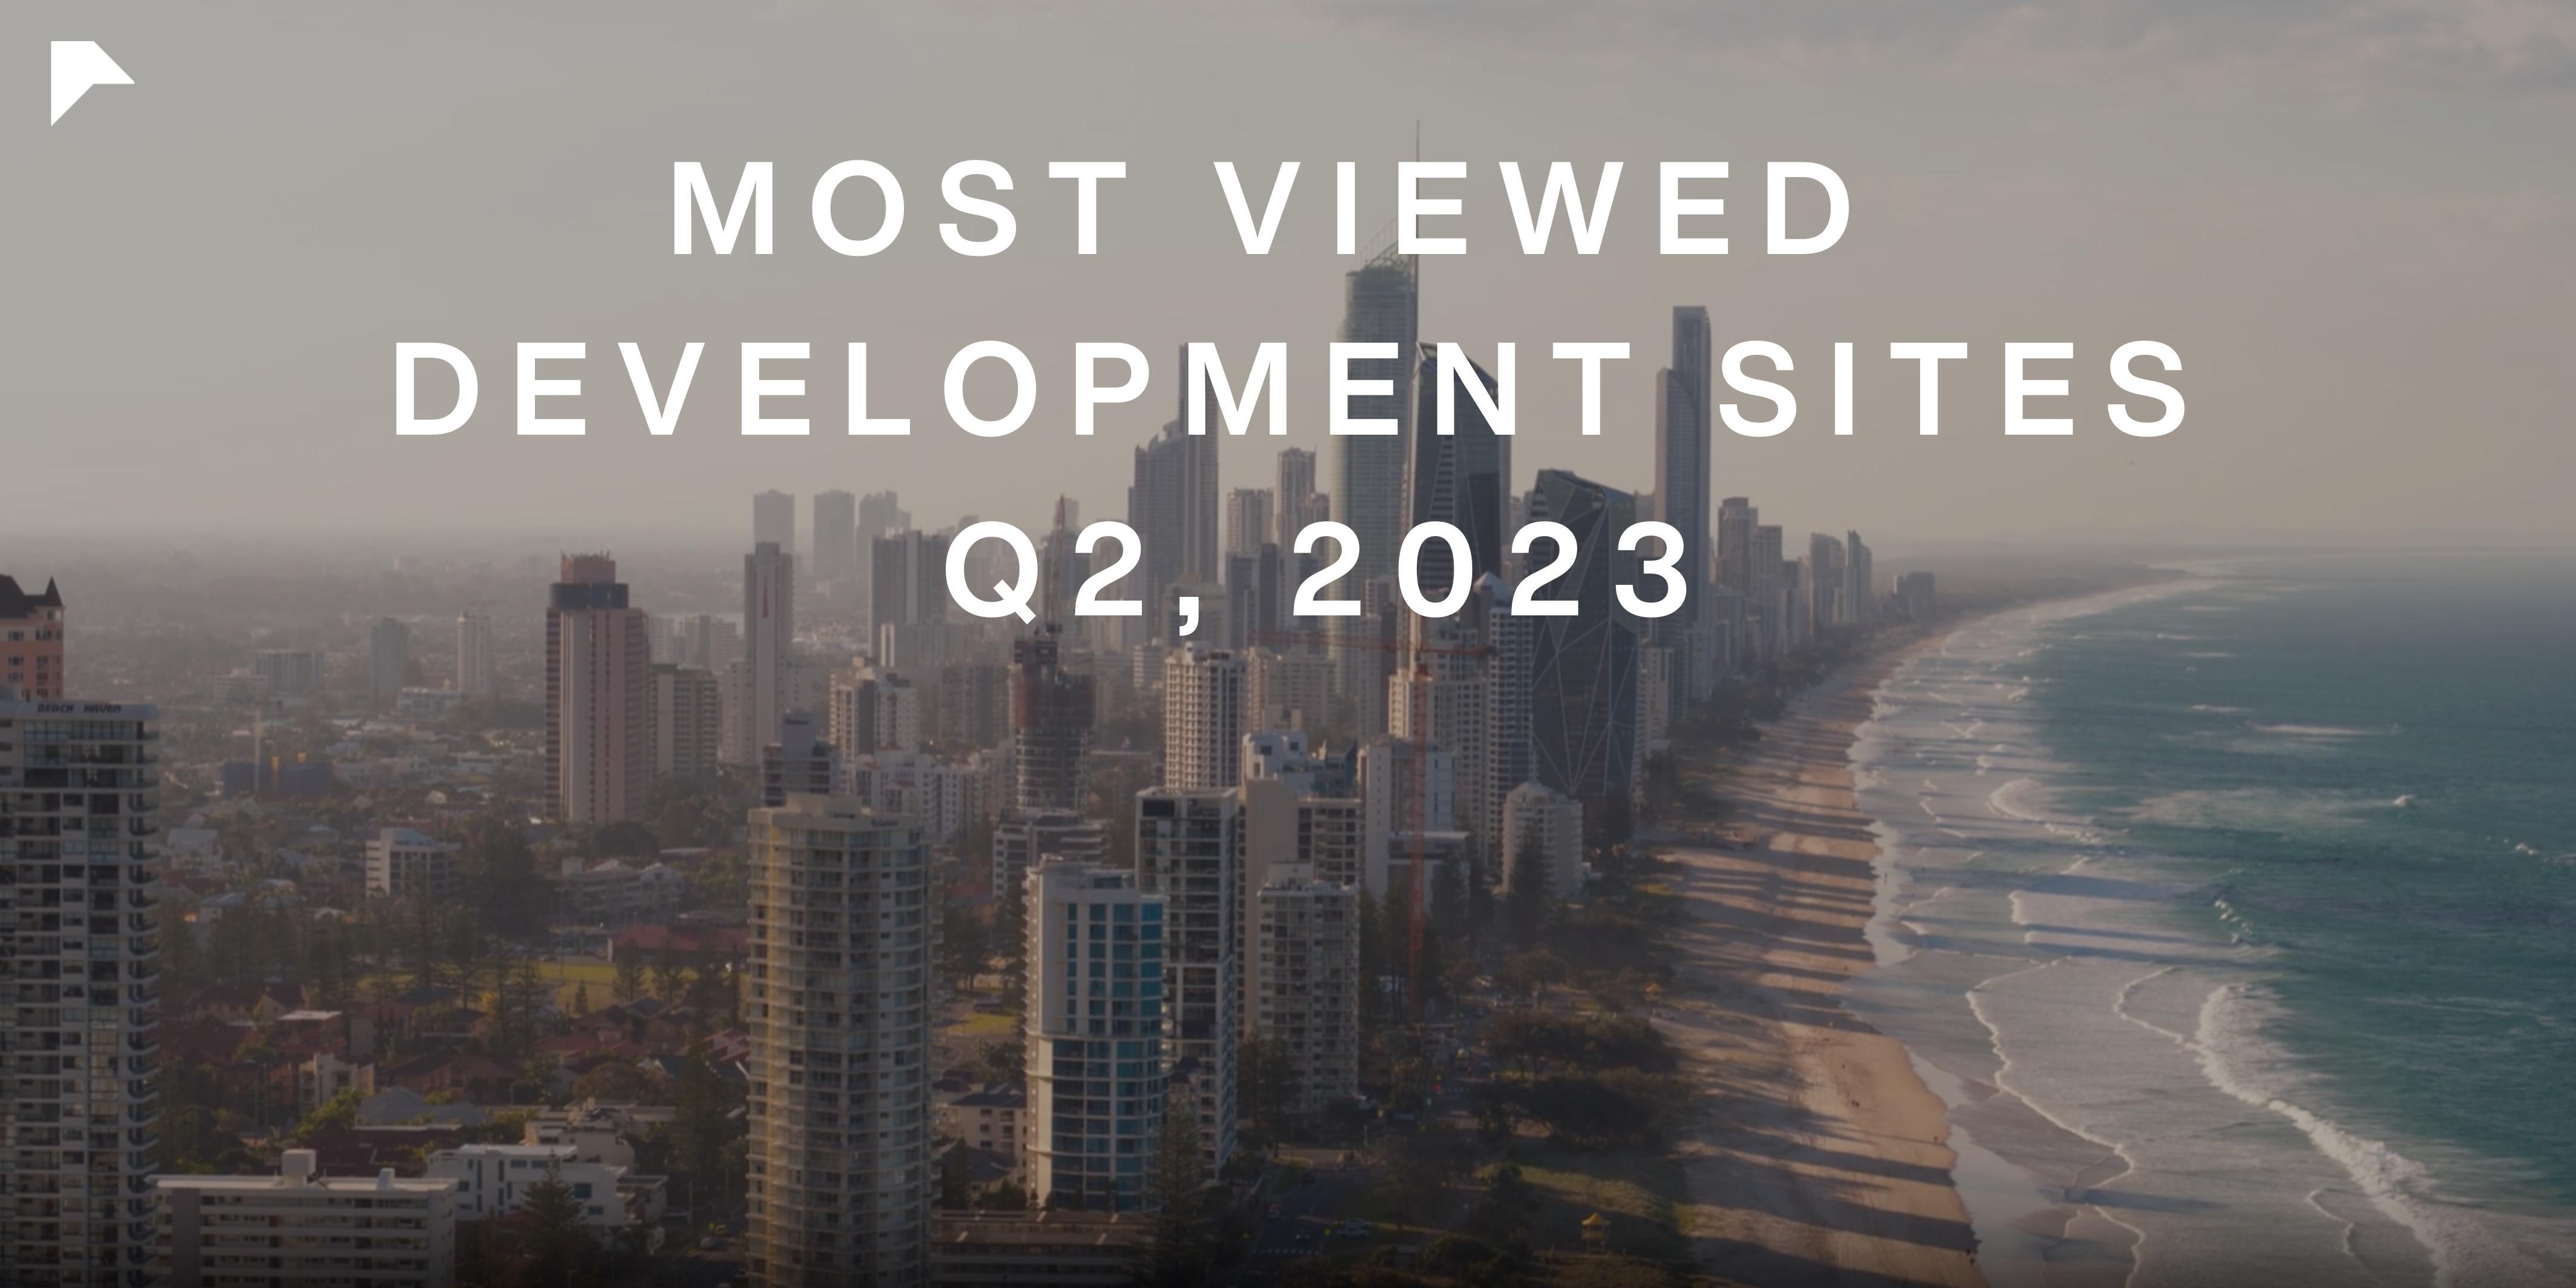 Our Most Viewed Development Sites Q2